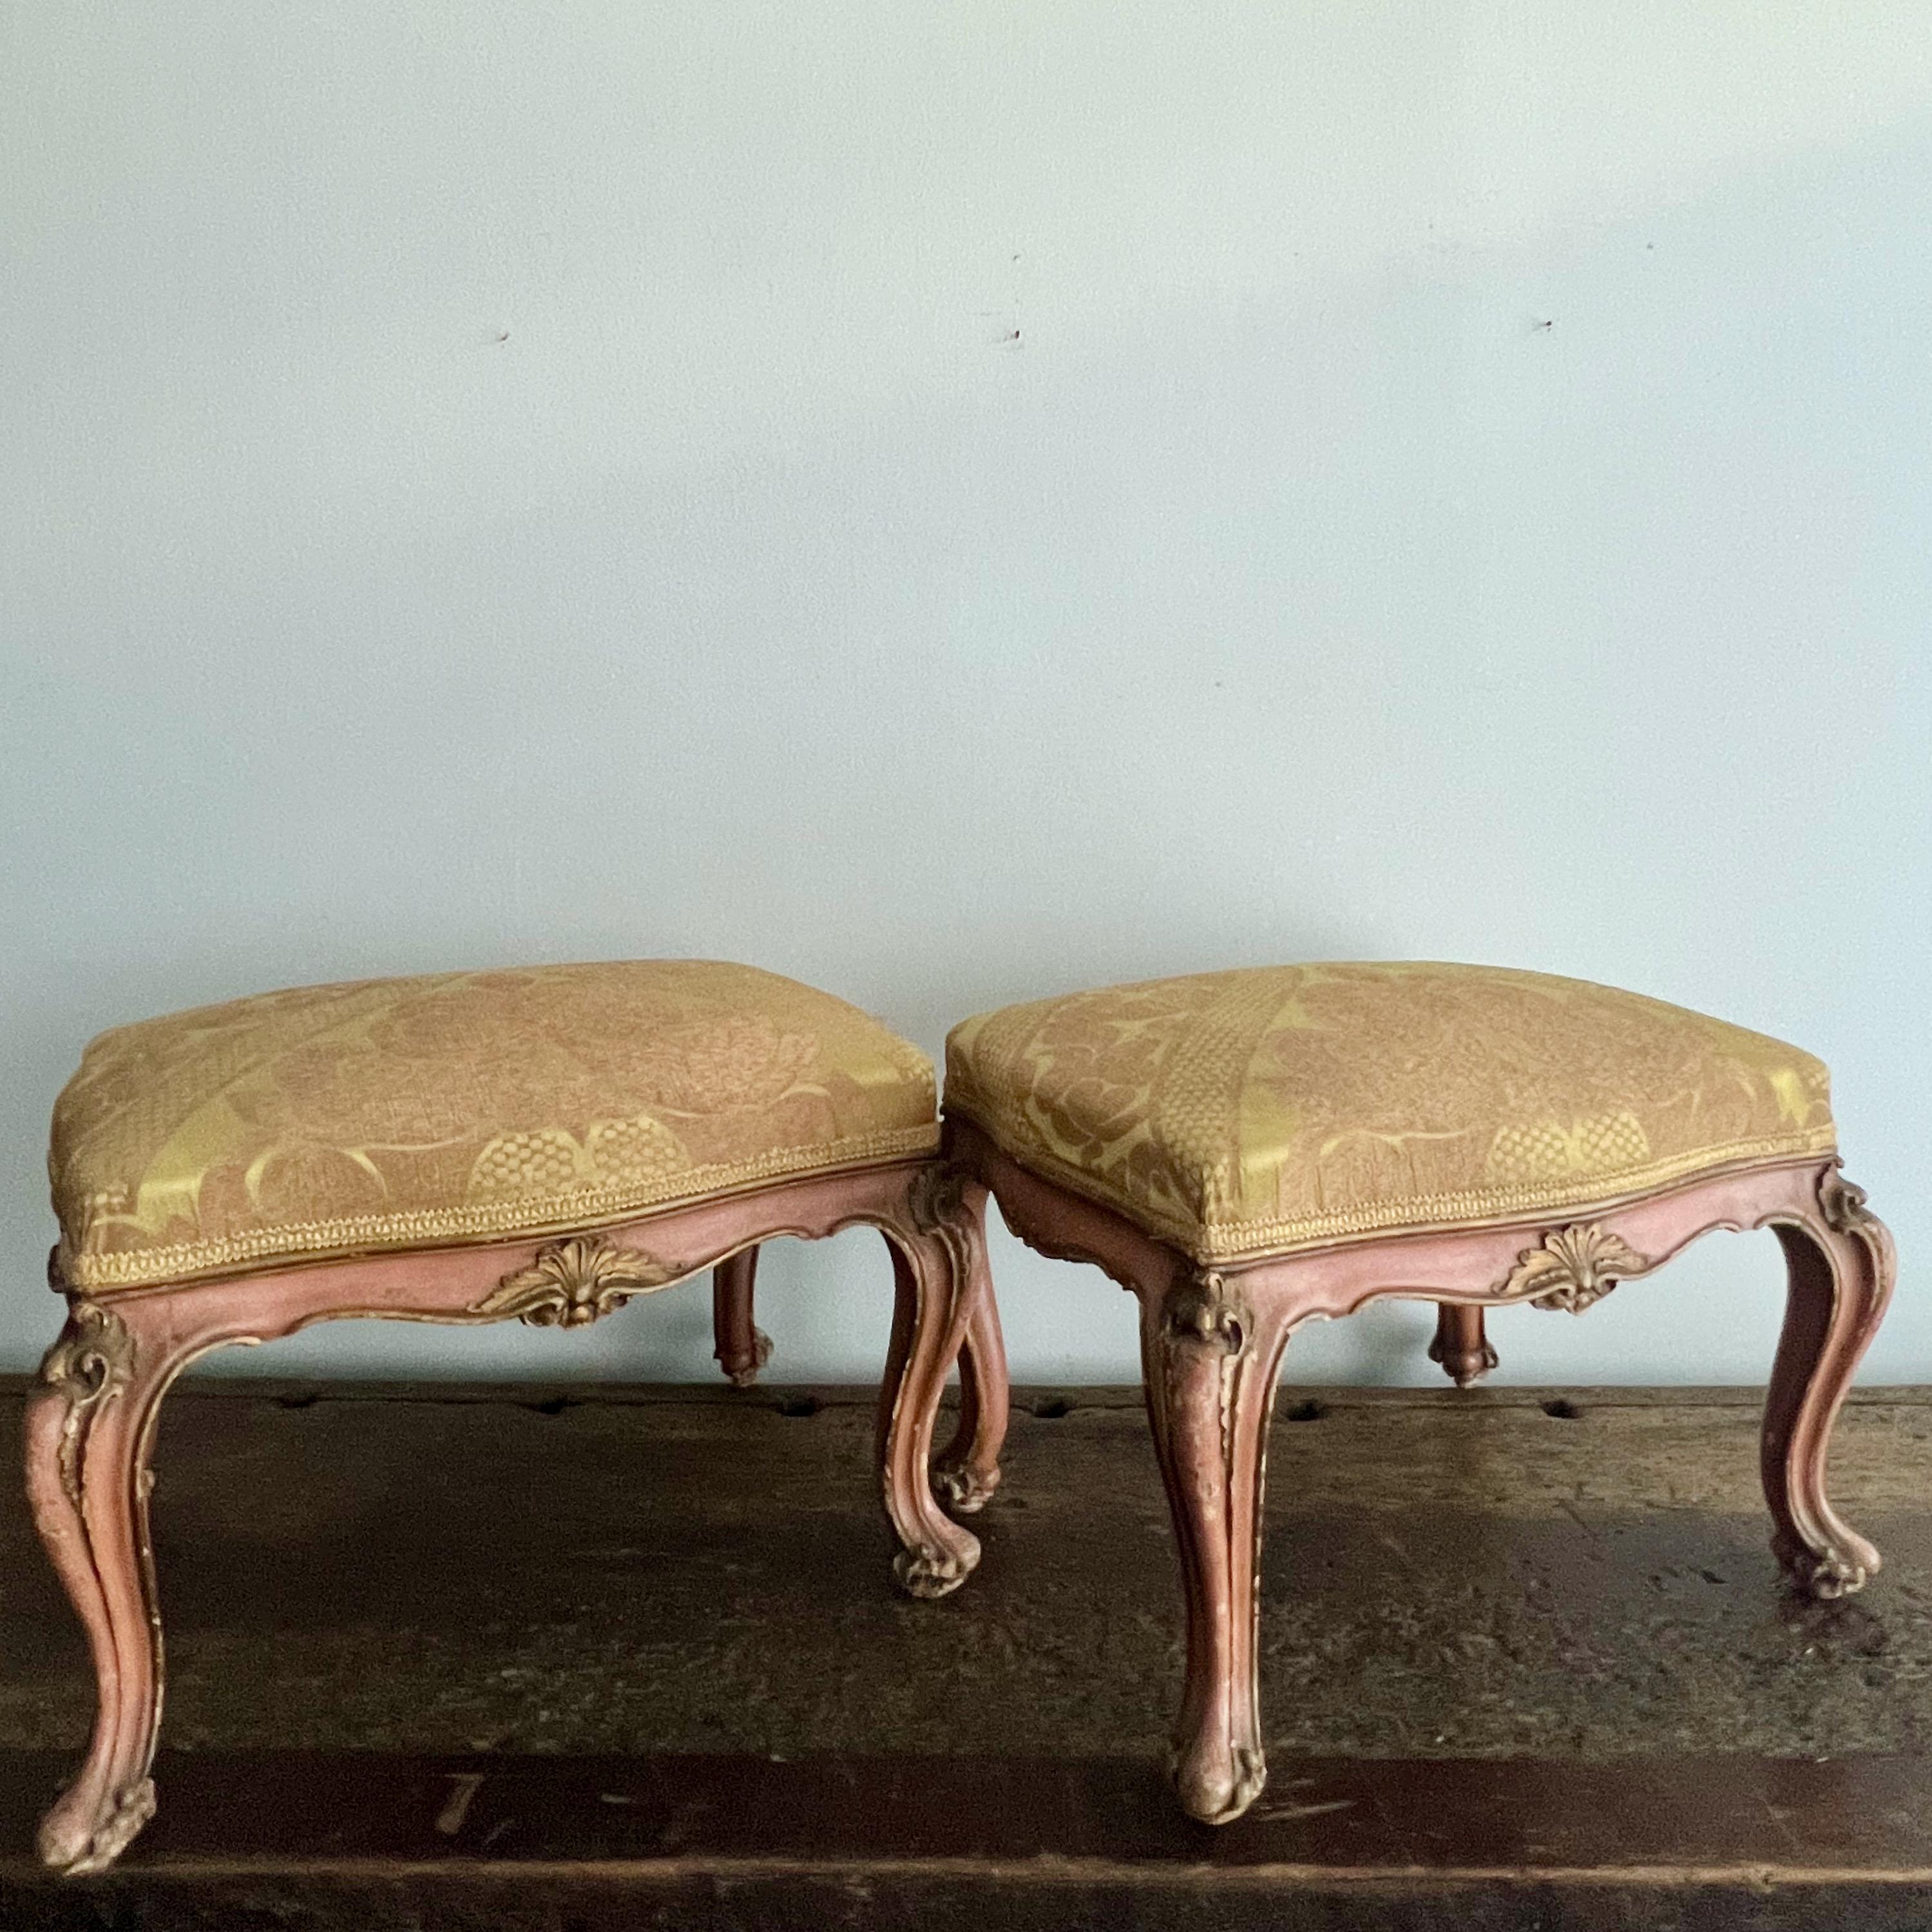 Pair of 19th century Italian painted Footstools standing on cabriole legs with richly foliate carvings and gilt wood decorations. 